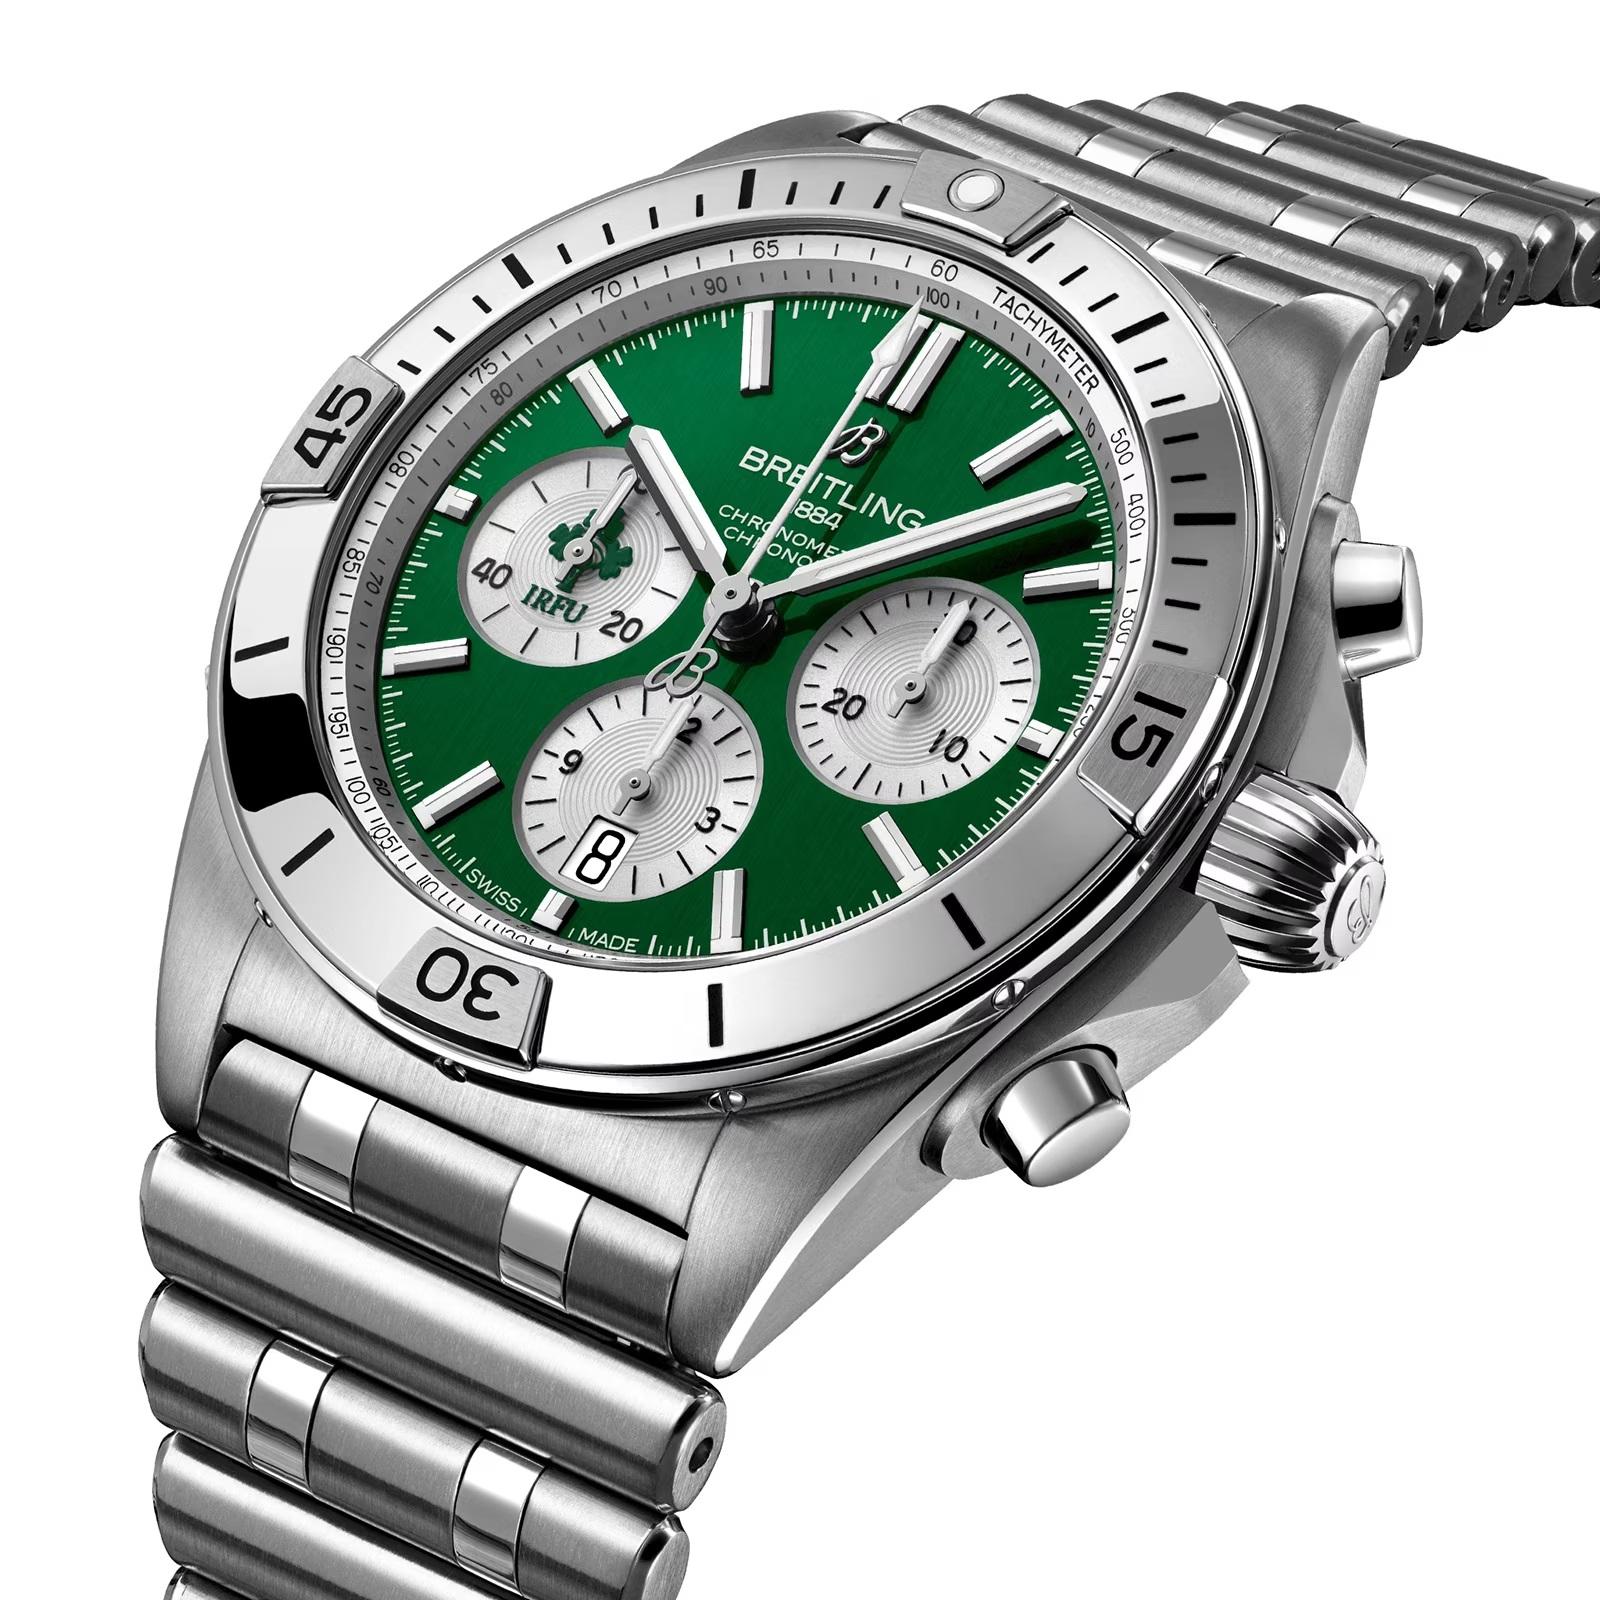 Contemporain ChRONOMAT B01 NOUVEAU BRAND ÉDITION EARLY EDiTION NEW BREITLING, 42 SIX NATIONS IRELAND WATCH